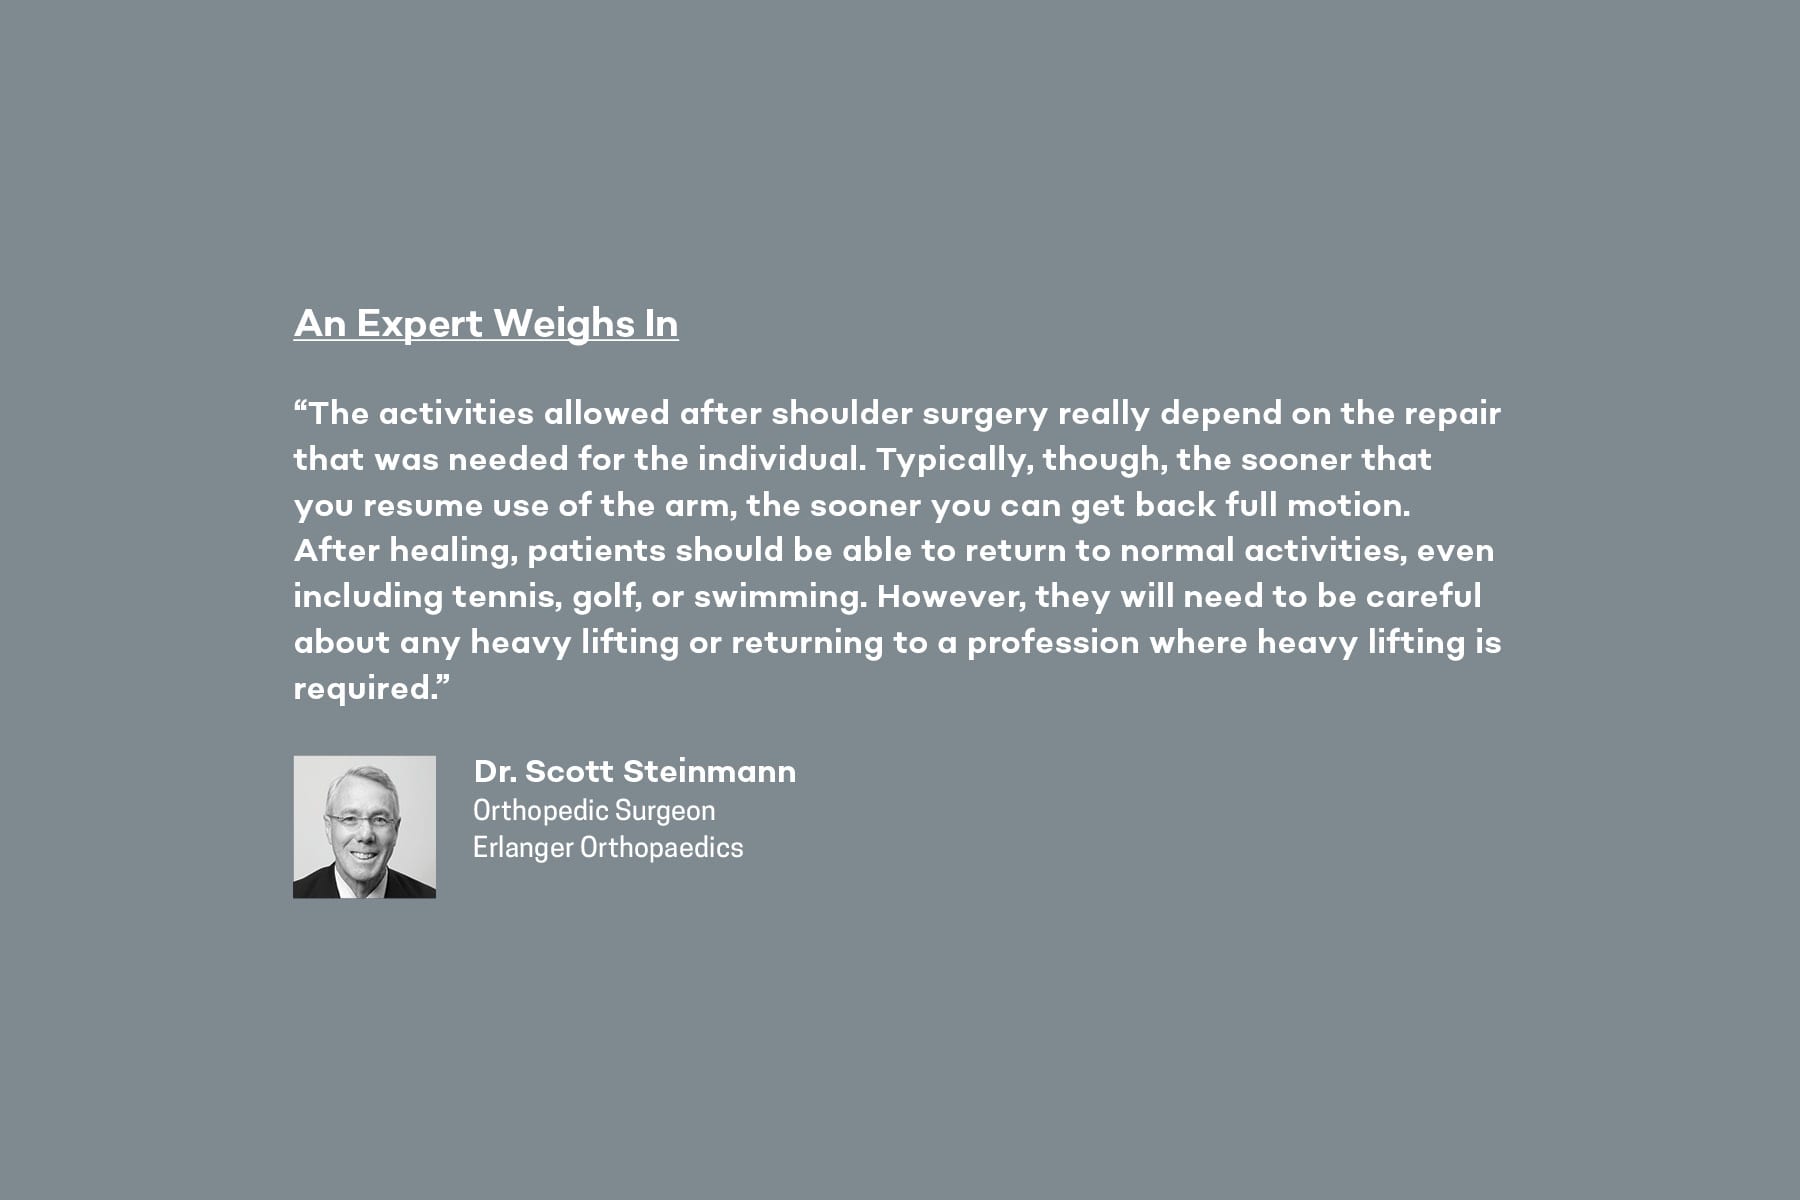 Dr. Scott Steinmann Orthopedic Surgeon Erlanger Orthopaedics gives expert advice on total shoulder replacements